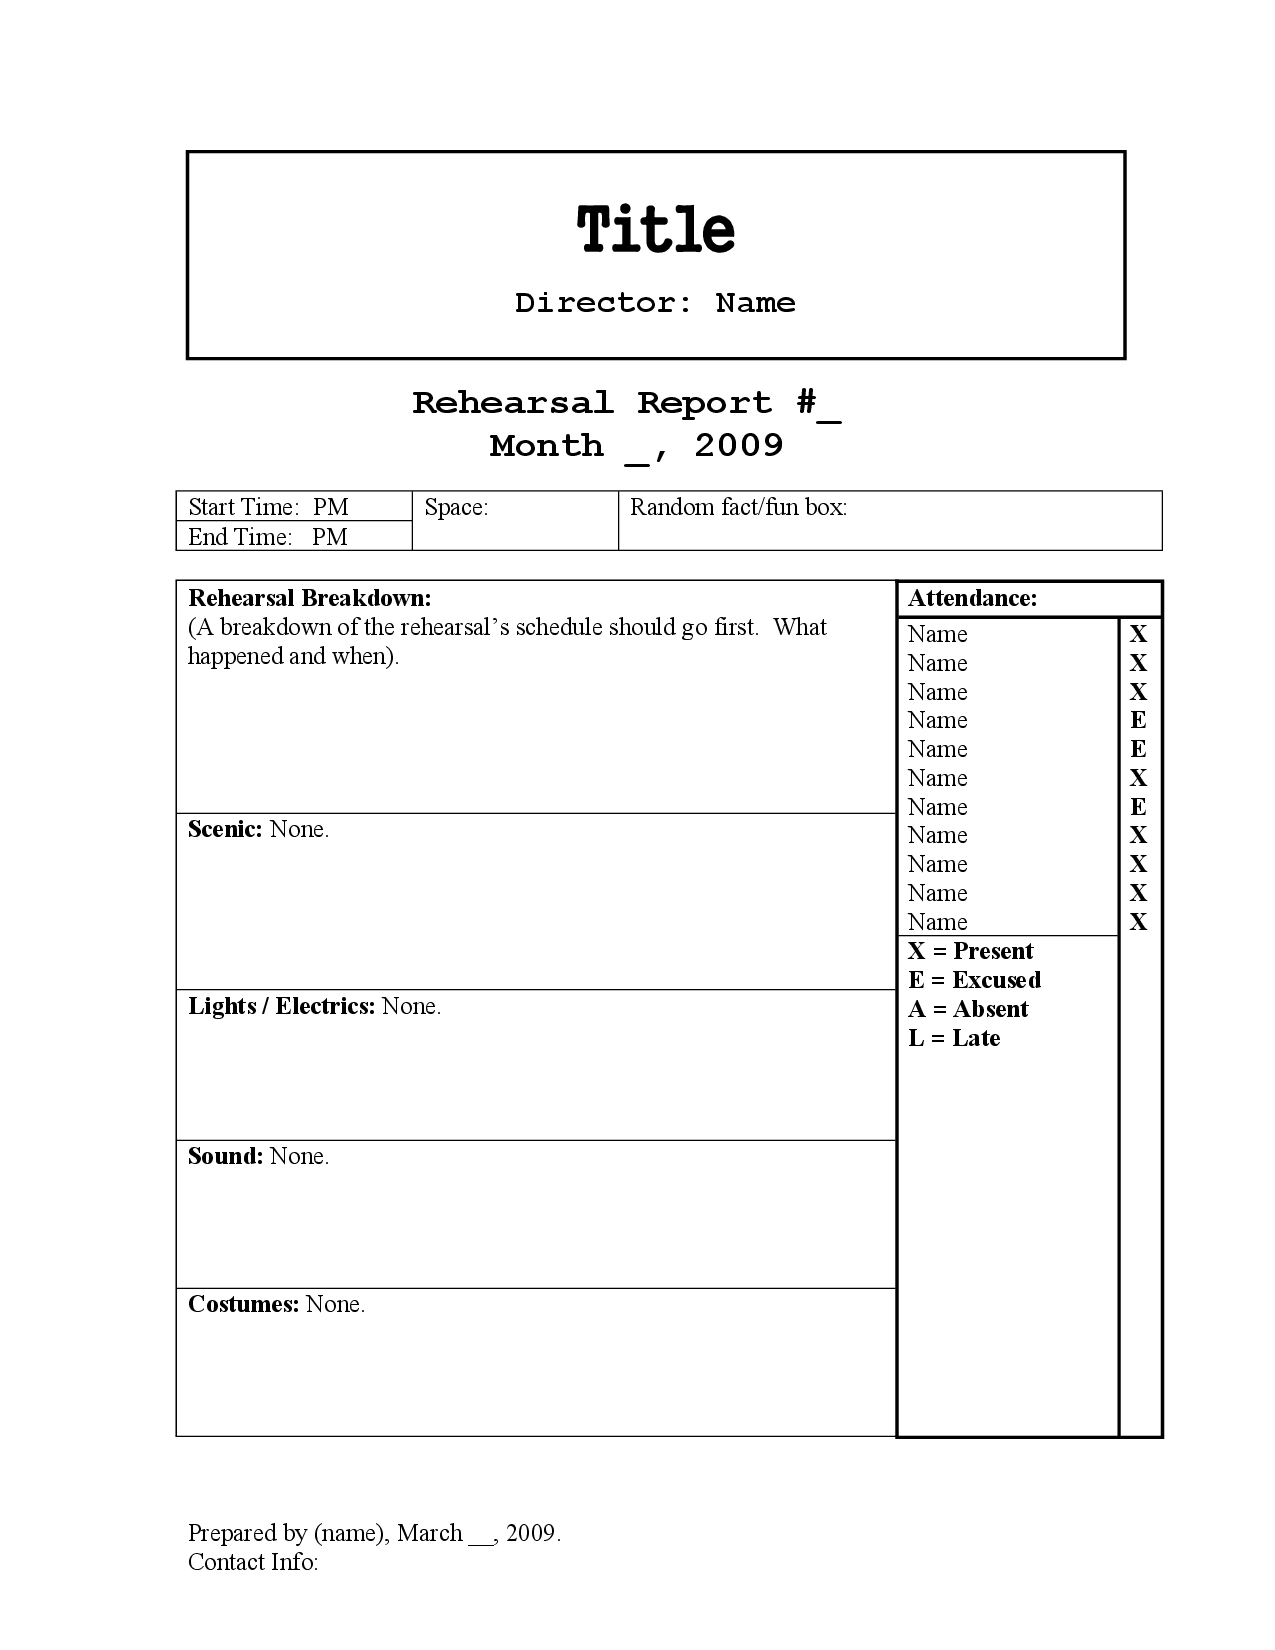 Rehearsal Report Template | Stage Manager In 2019 | Project For Sound Report Template